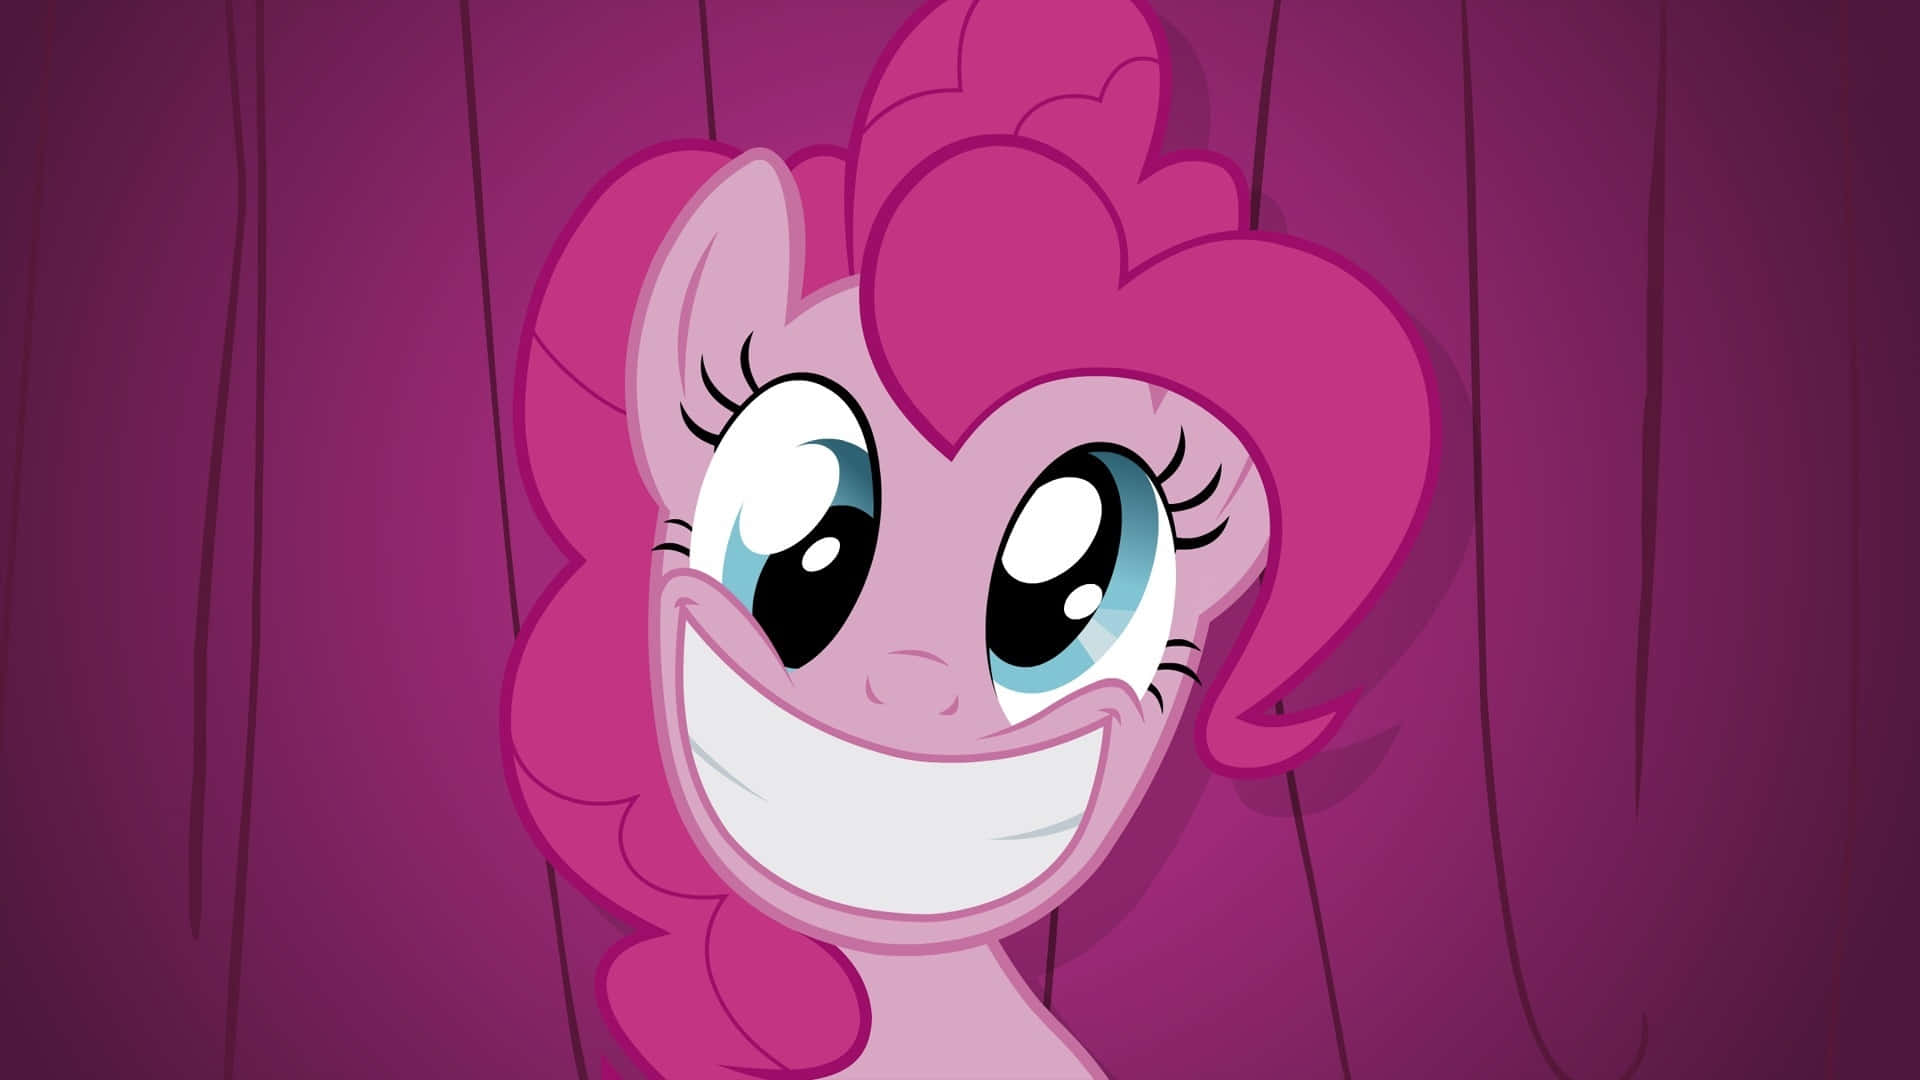 "A Smile for Every Occasion: Pinkie Pie"